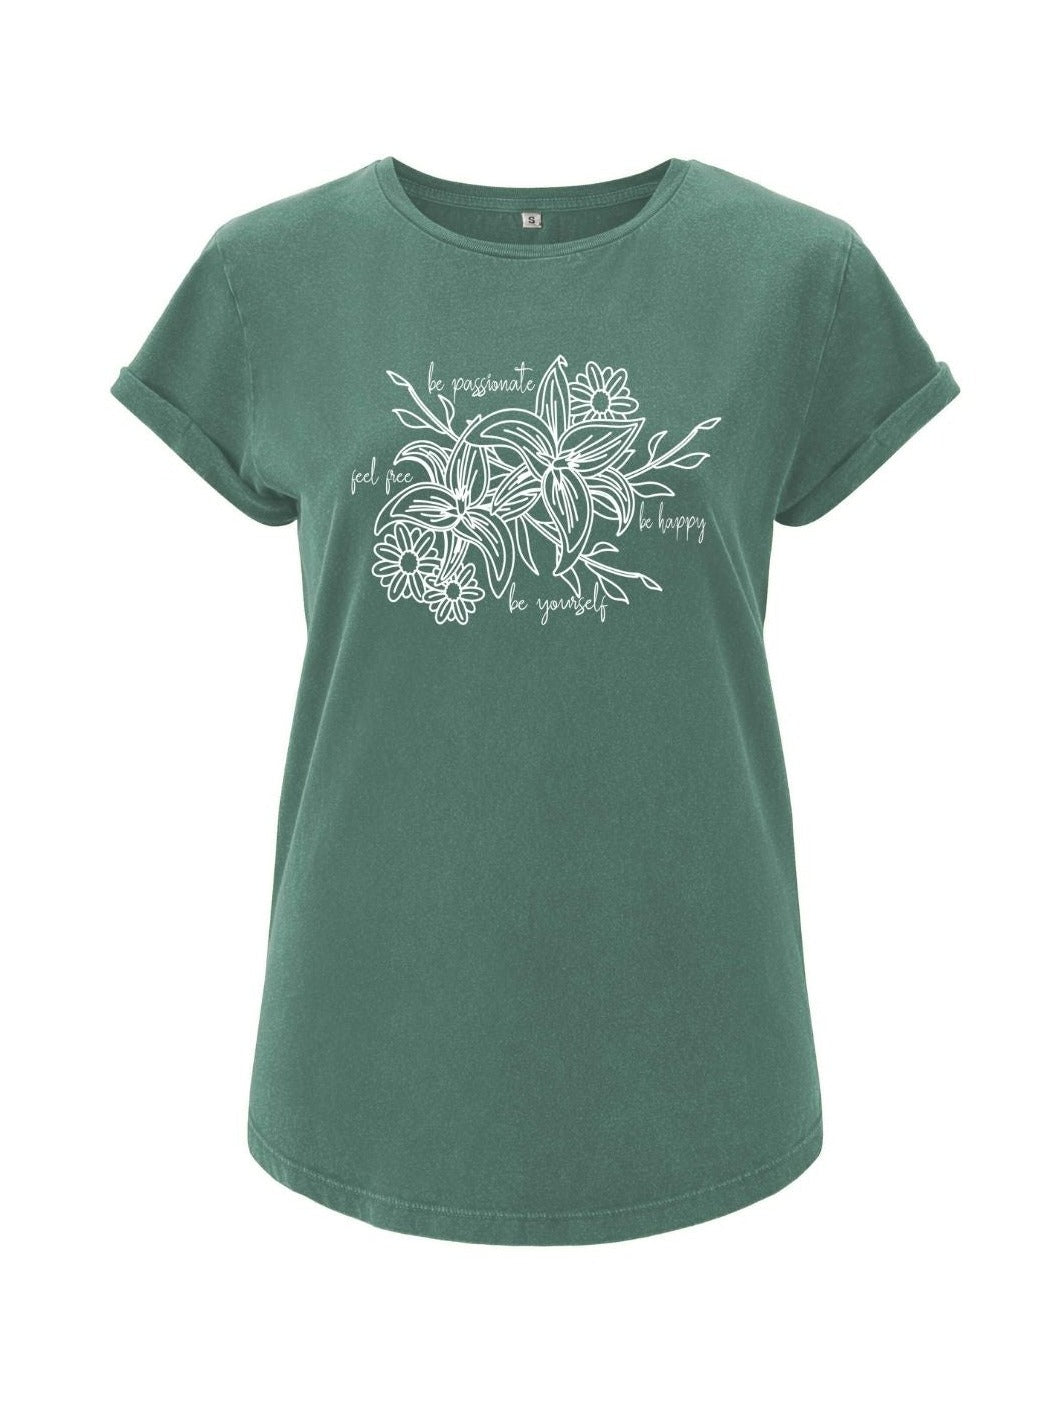 Damen T-Shirt BE YOURSELF rolled arms sage green